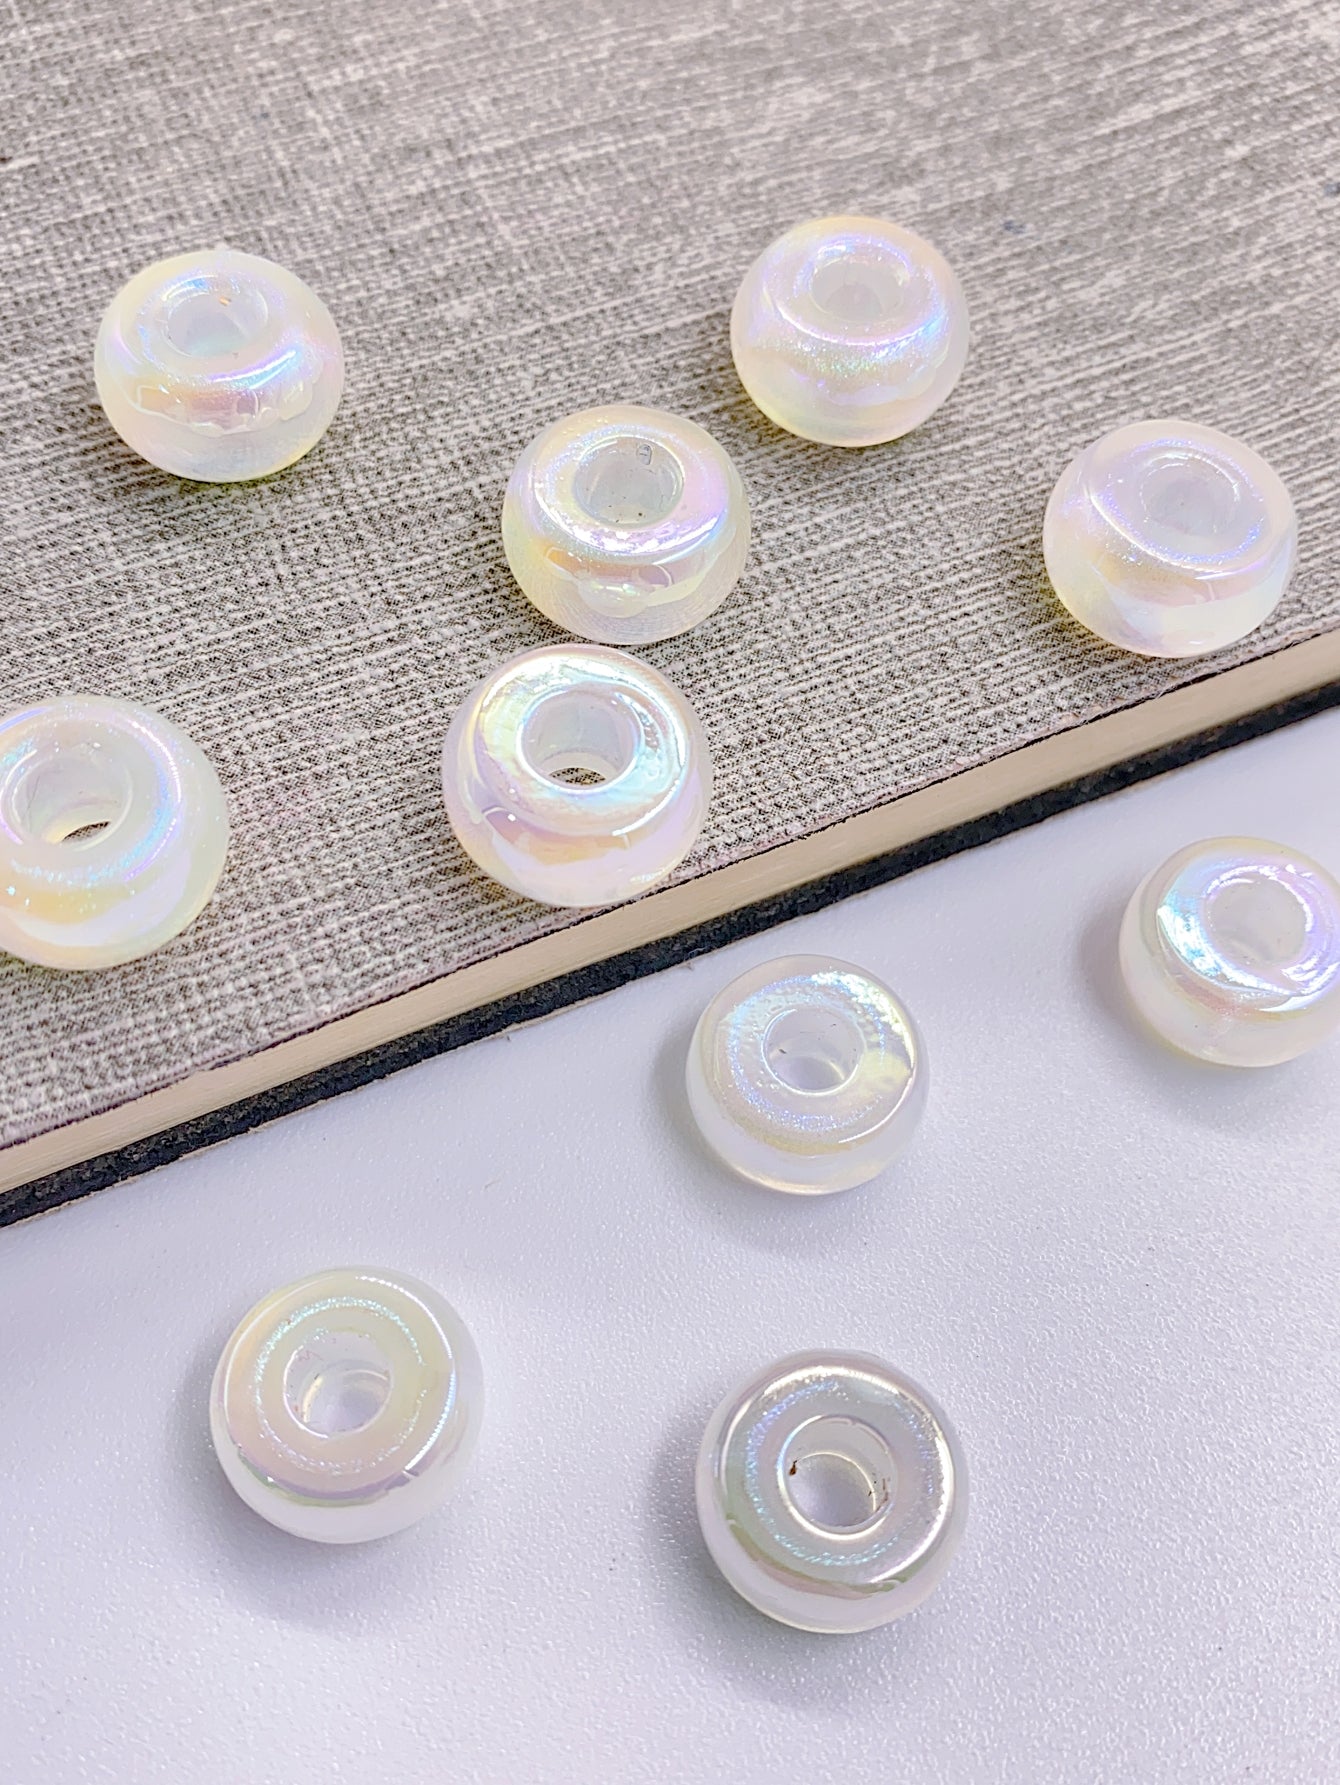 abs imitation pearl mermaid Star color series acrylic wheel bead flat bead color loose bead pendant necklace wearing bead jewelry 10 pieces